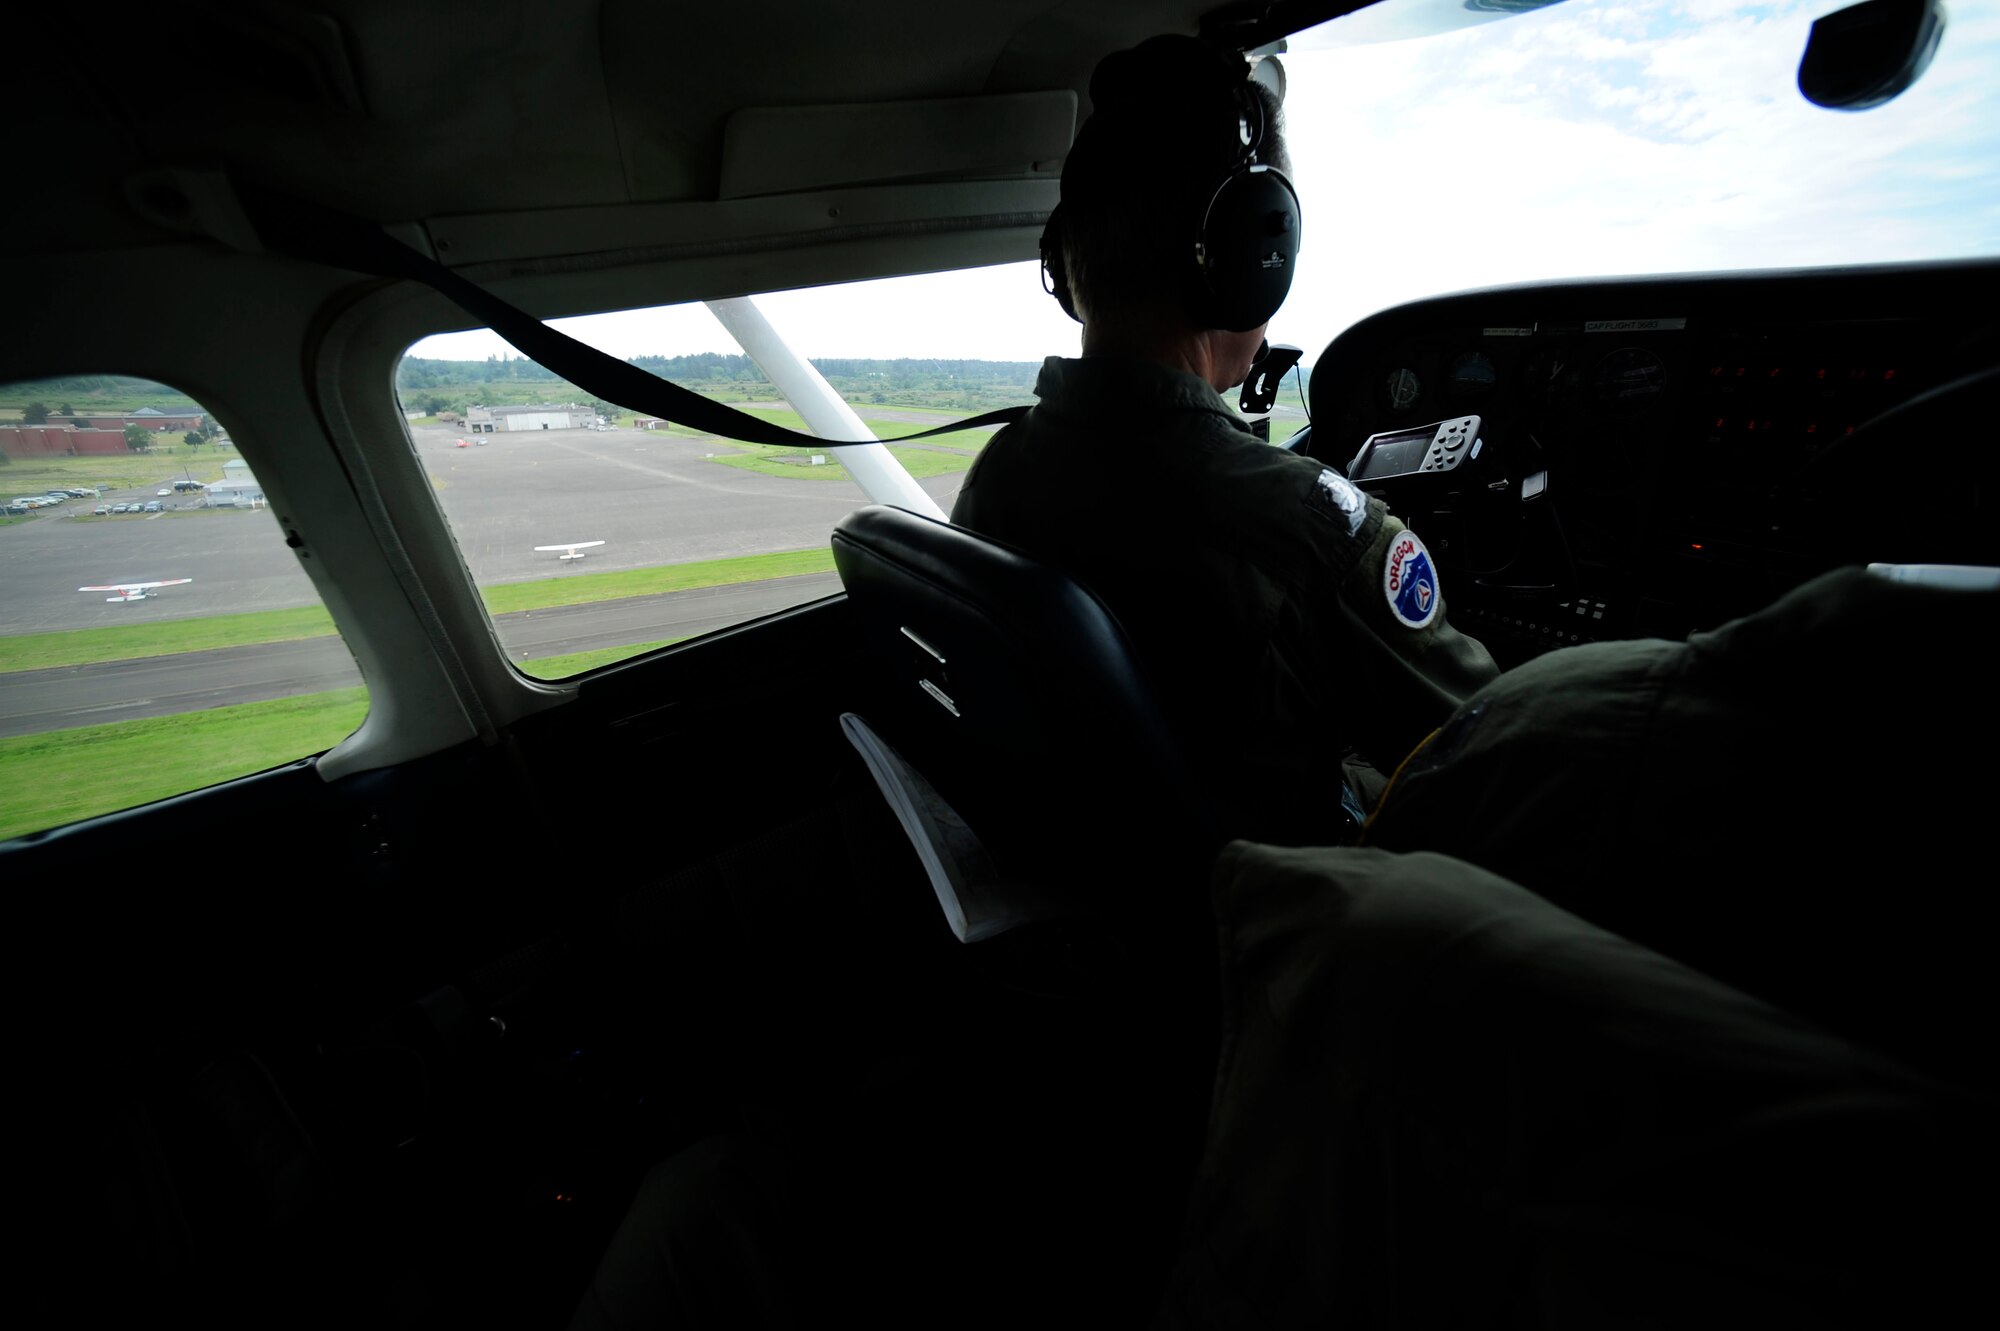 Lt. Col. Wayne Schulz, U.S. Air Force Auxiliary, Civil Air Patrol, takes off in a C-182 Cessna from Astoria, Ore. during Amalgam Dart 2009, June 18. Amalgam Dart is a field test of the Department of Defense's ability to rapidly deploy a total air integrated defense system in the U.S. in order to deter, detect and defeat airborne threats. (U.S. Air Force photo by Staff Sgt. Jacob N. Bailey)